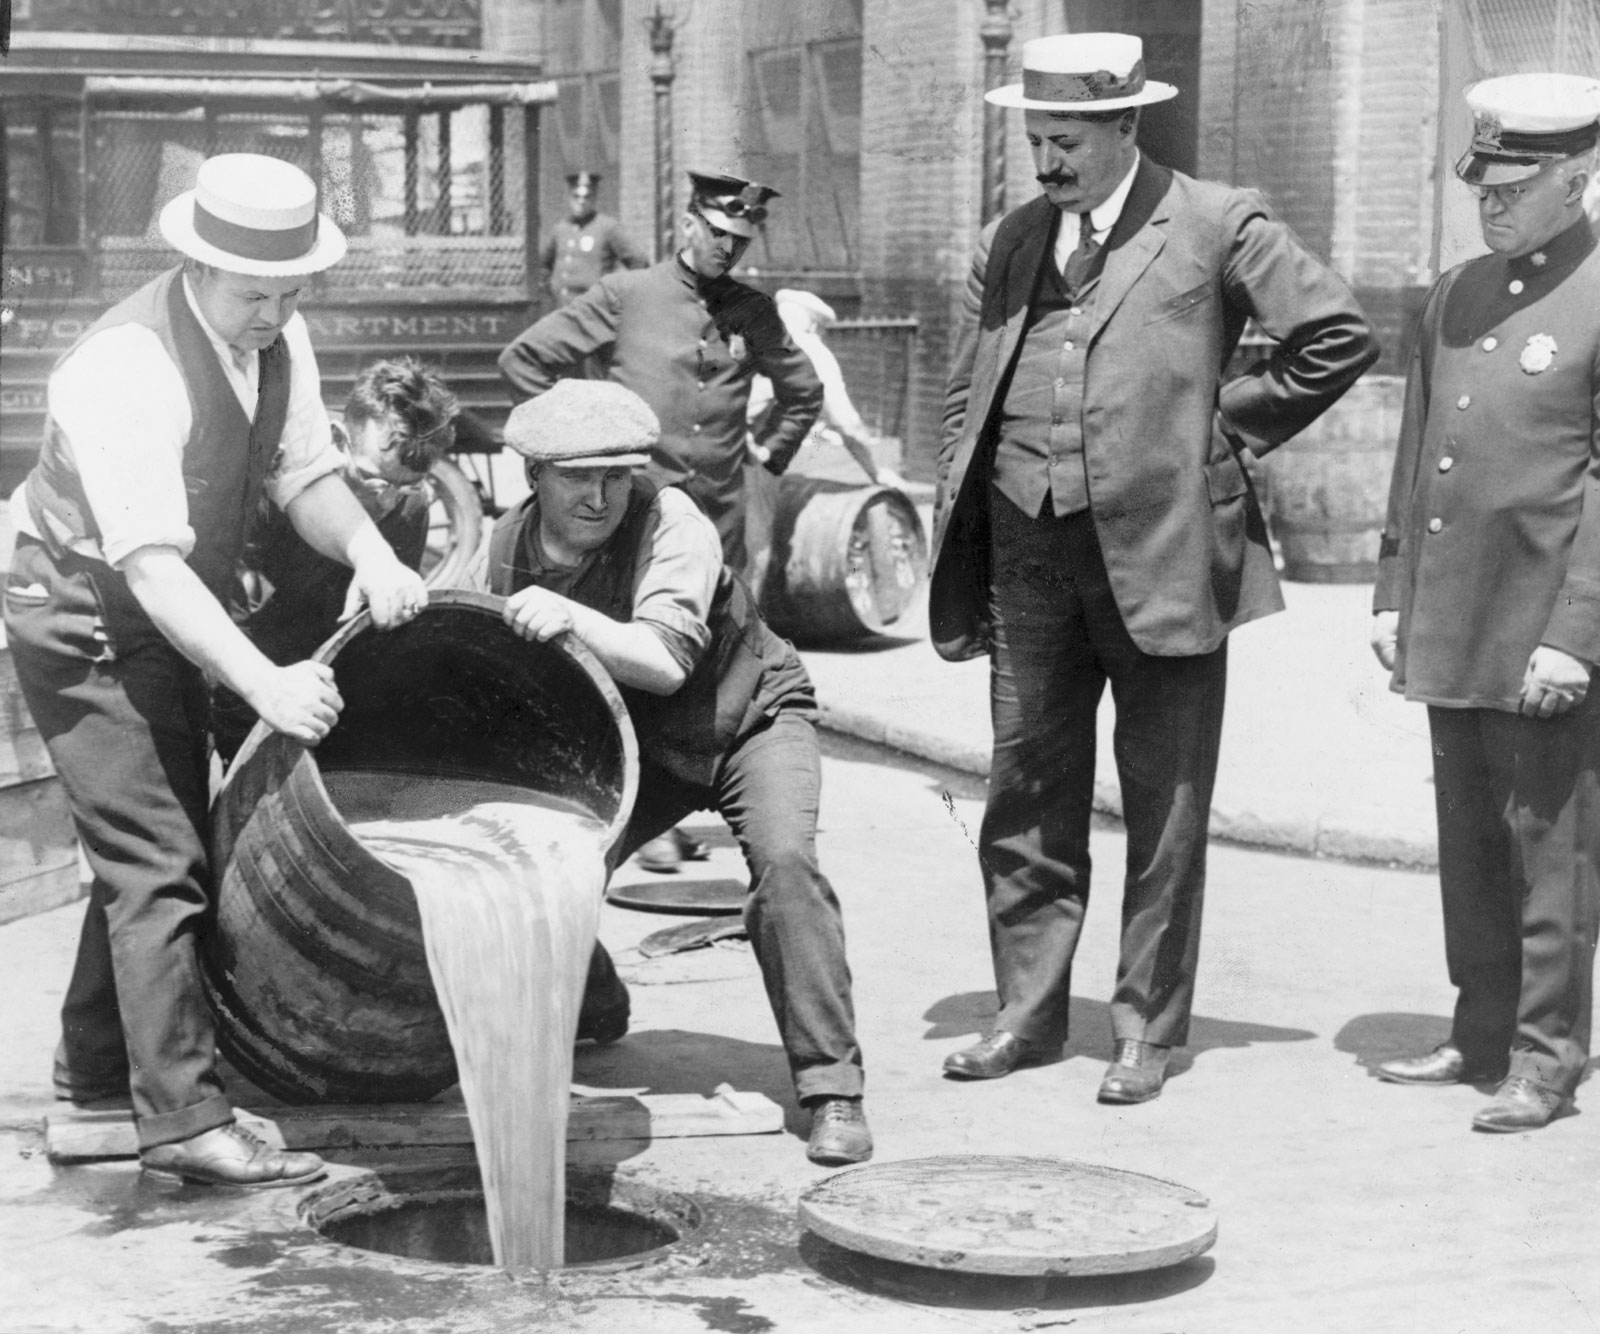 Is Your History Knowledge Better Than the Average Person? prohibition